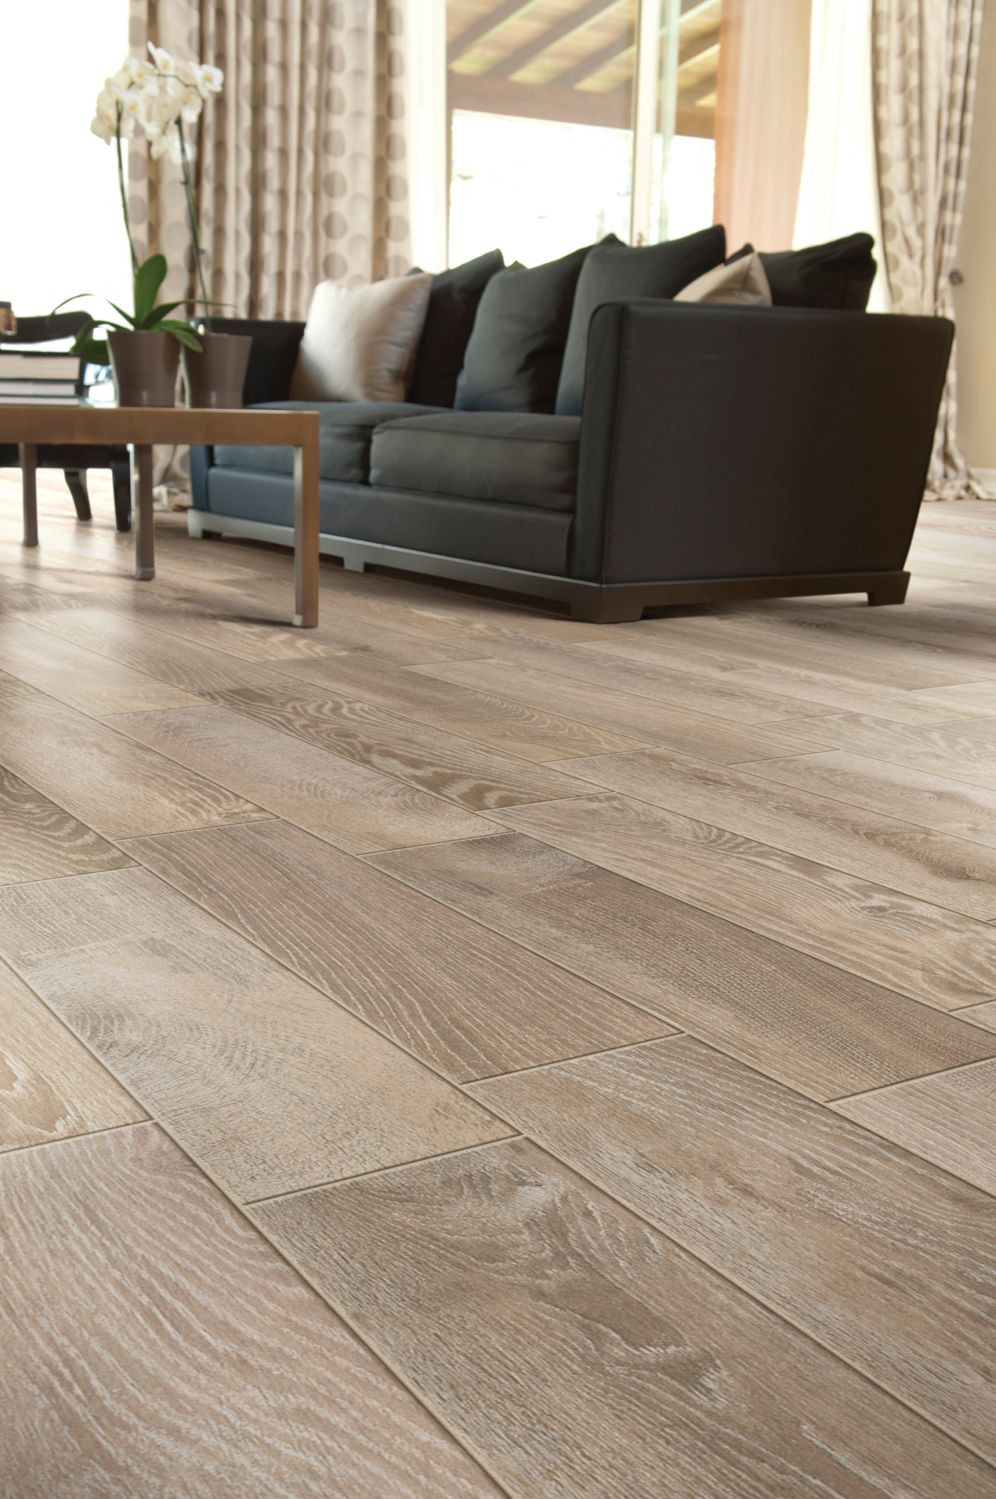 24 Fashionable Hardwood Flooring north York 2024 free download hardwood flooring north york of cork underlayment premium cork sheets rolls 2017 flooring in love this tile plank flooring perfect color for weathered oak look porcelain that looks like hard